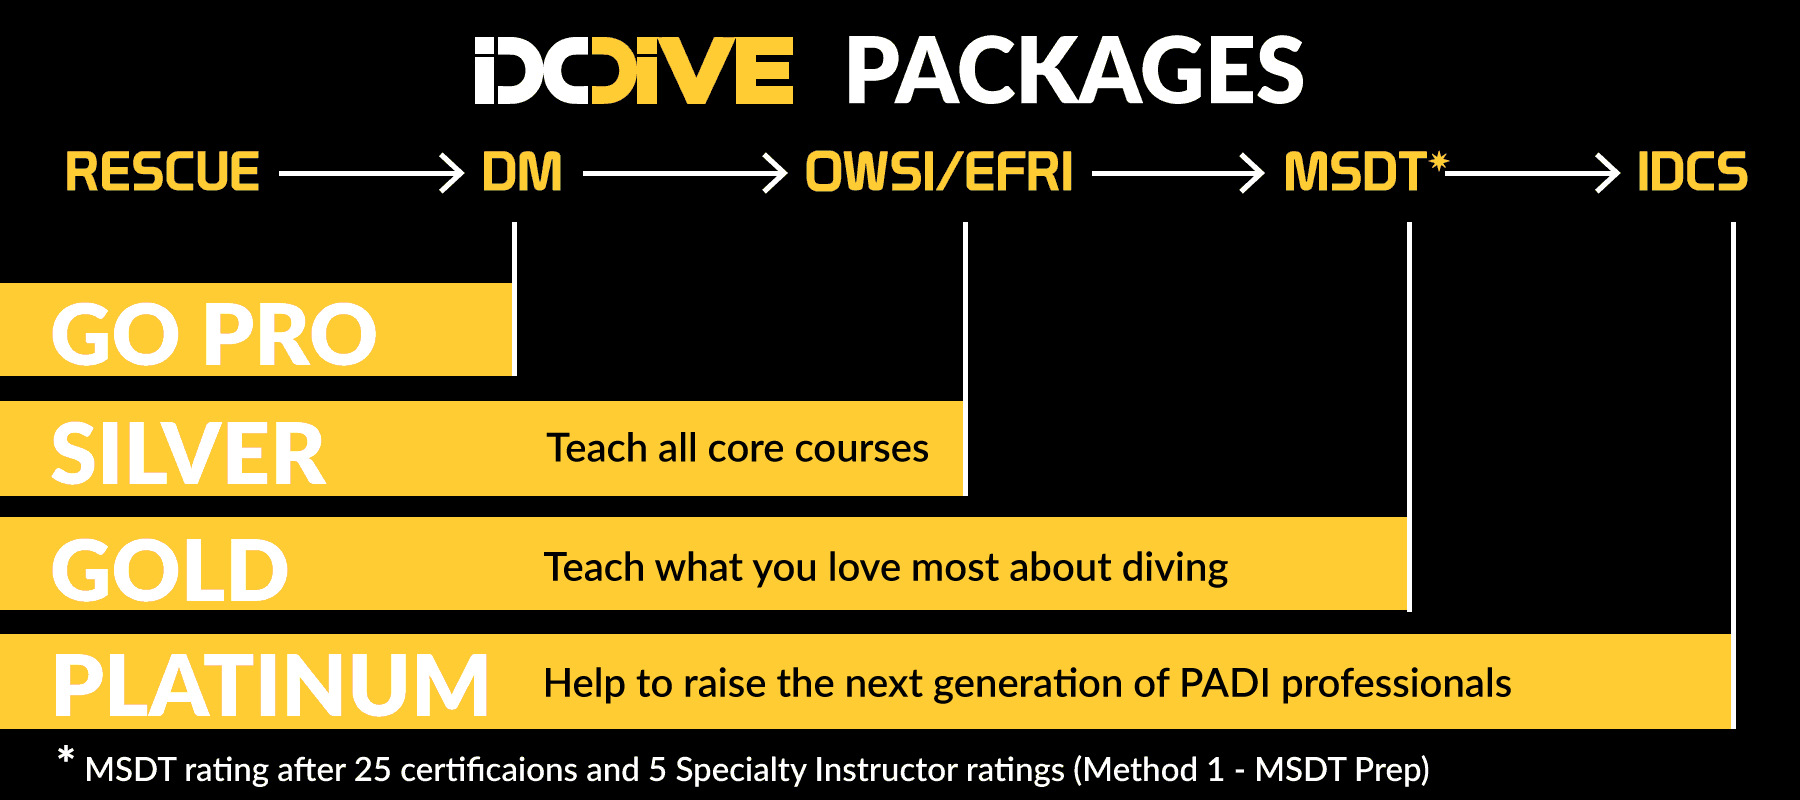 Materials for the PADI IDC